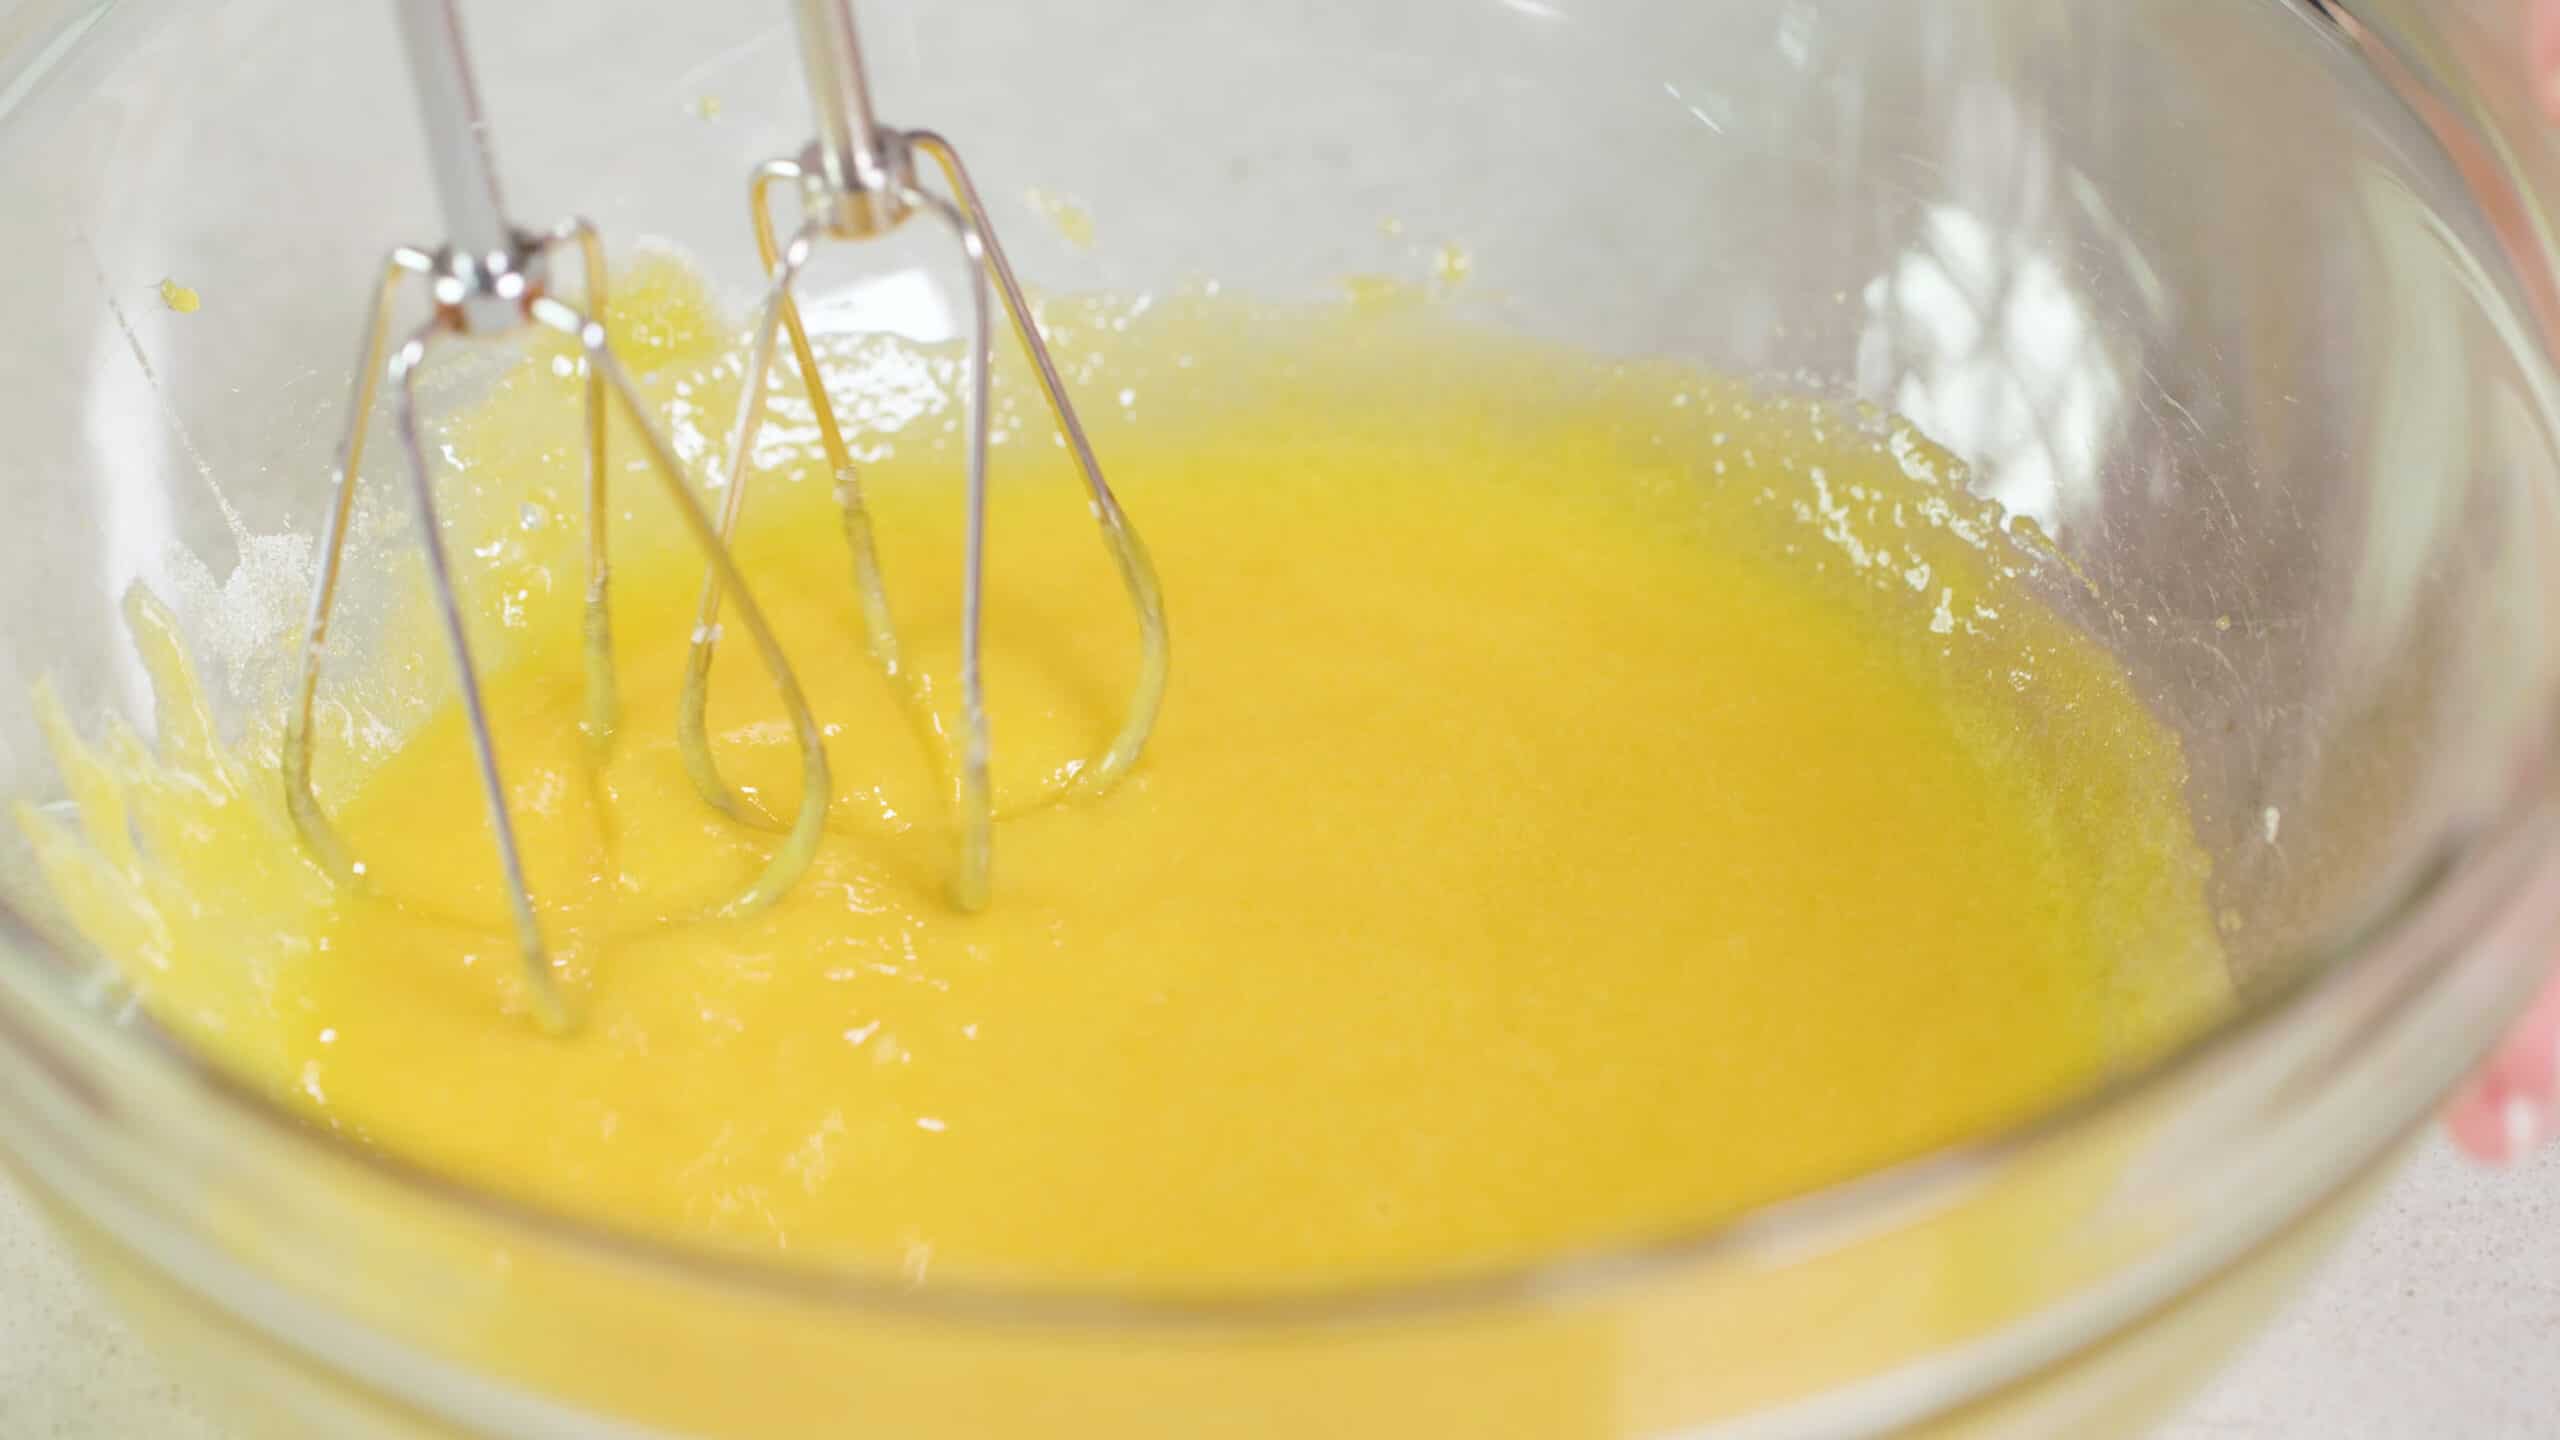 Close-up view of beaten egg yolks in a large clear glass mixing bowl with the metal wire beaters from a hand mixing.